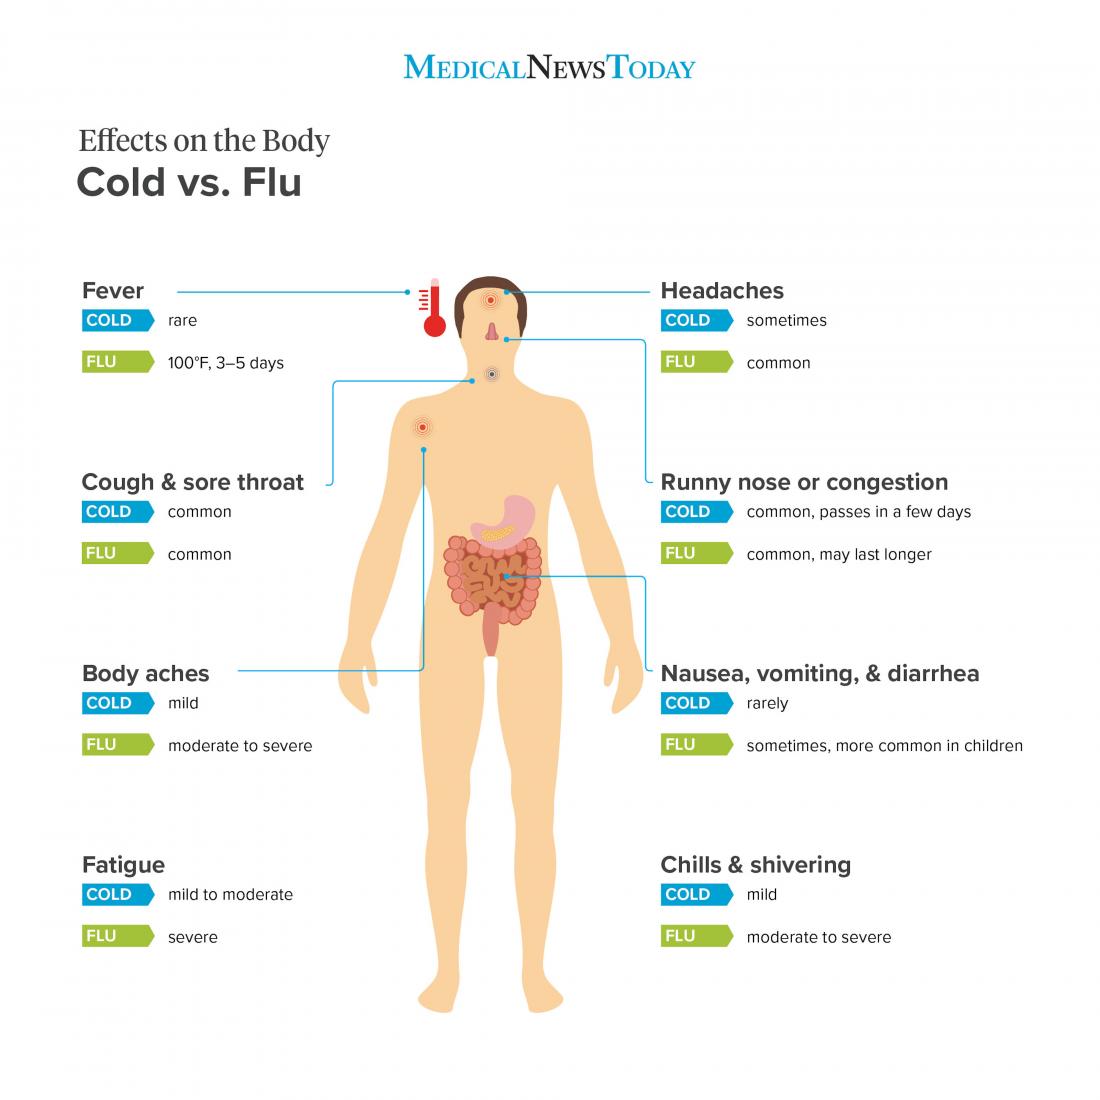 Flu and cold effects on the body